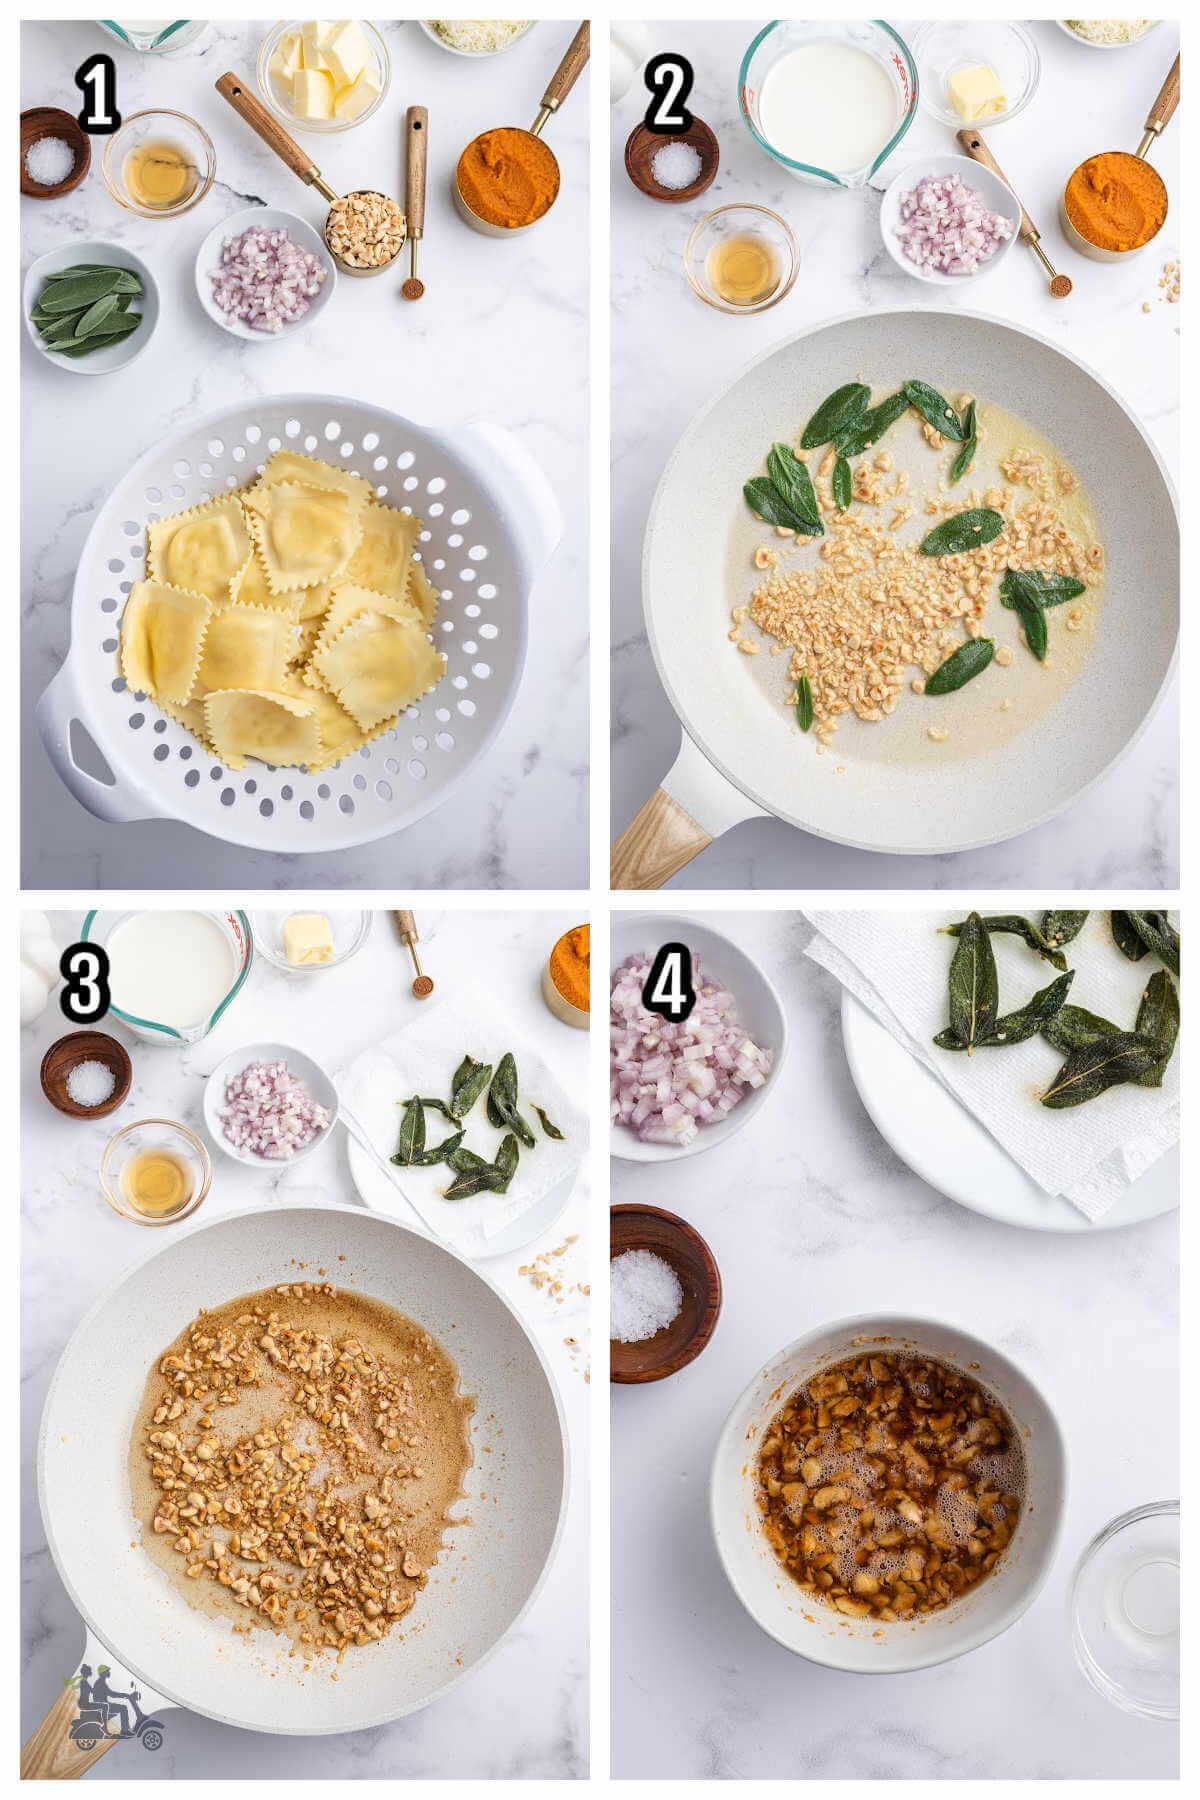 The first four steps to making the pumpkin pasta sauce with cheese ravioli. 